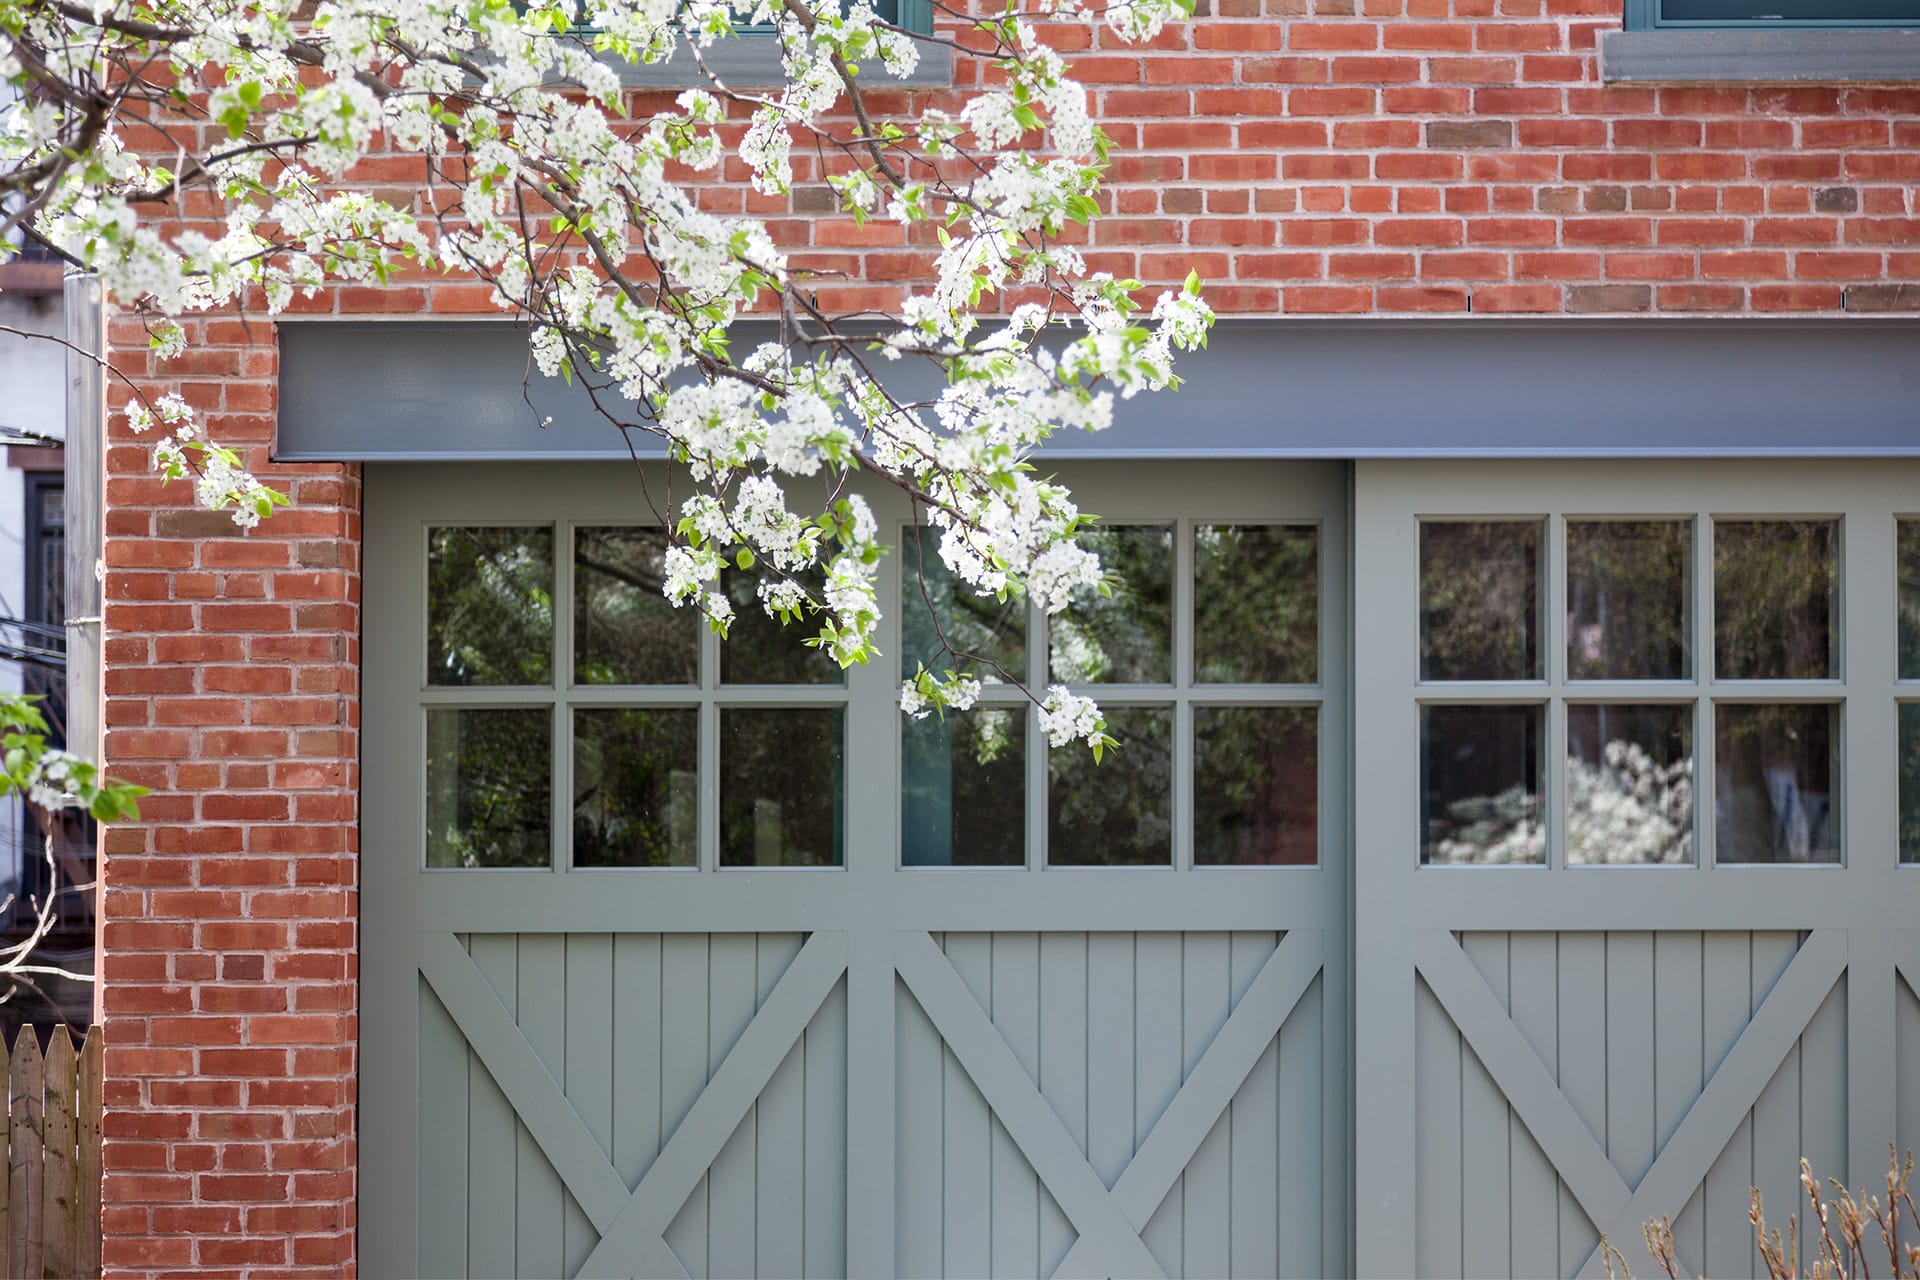 Close up of the green barn doors of a freestanding brick carriage house in Cobble Hill